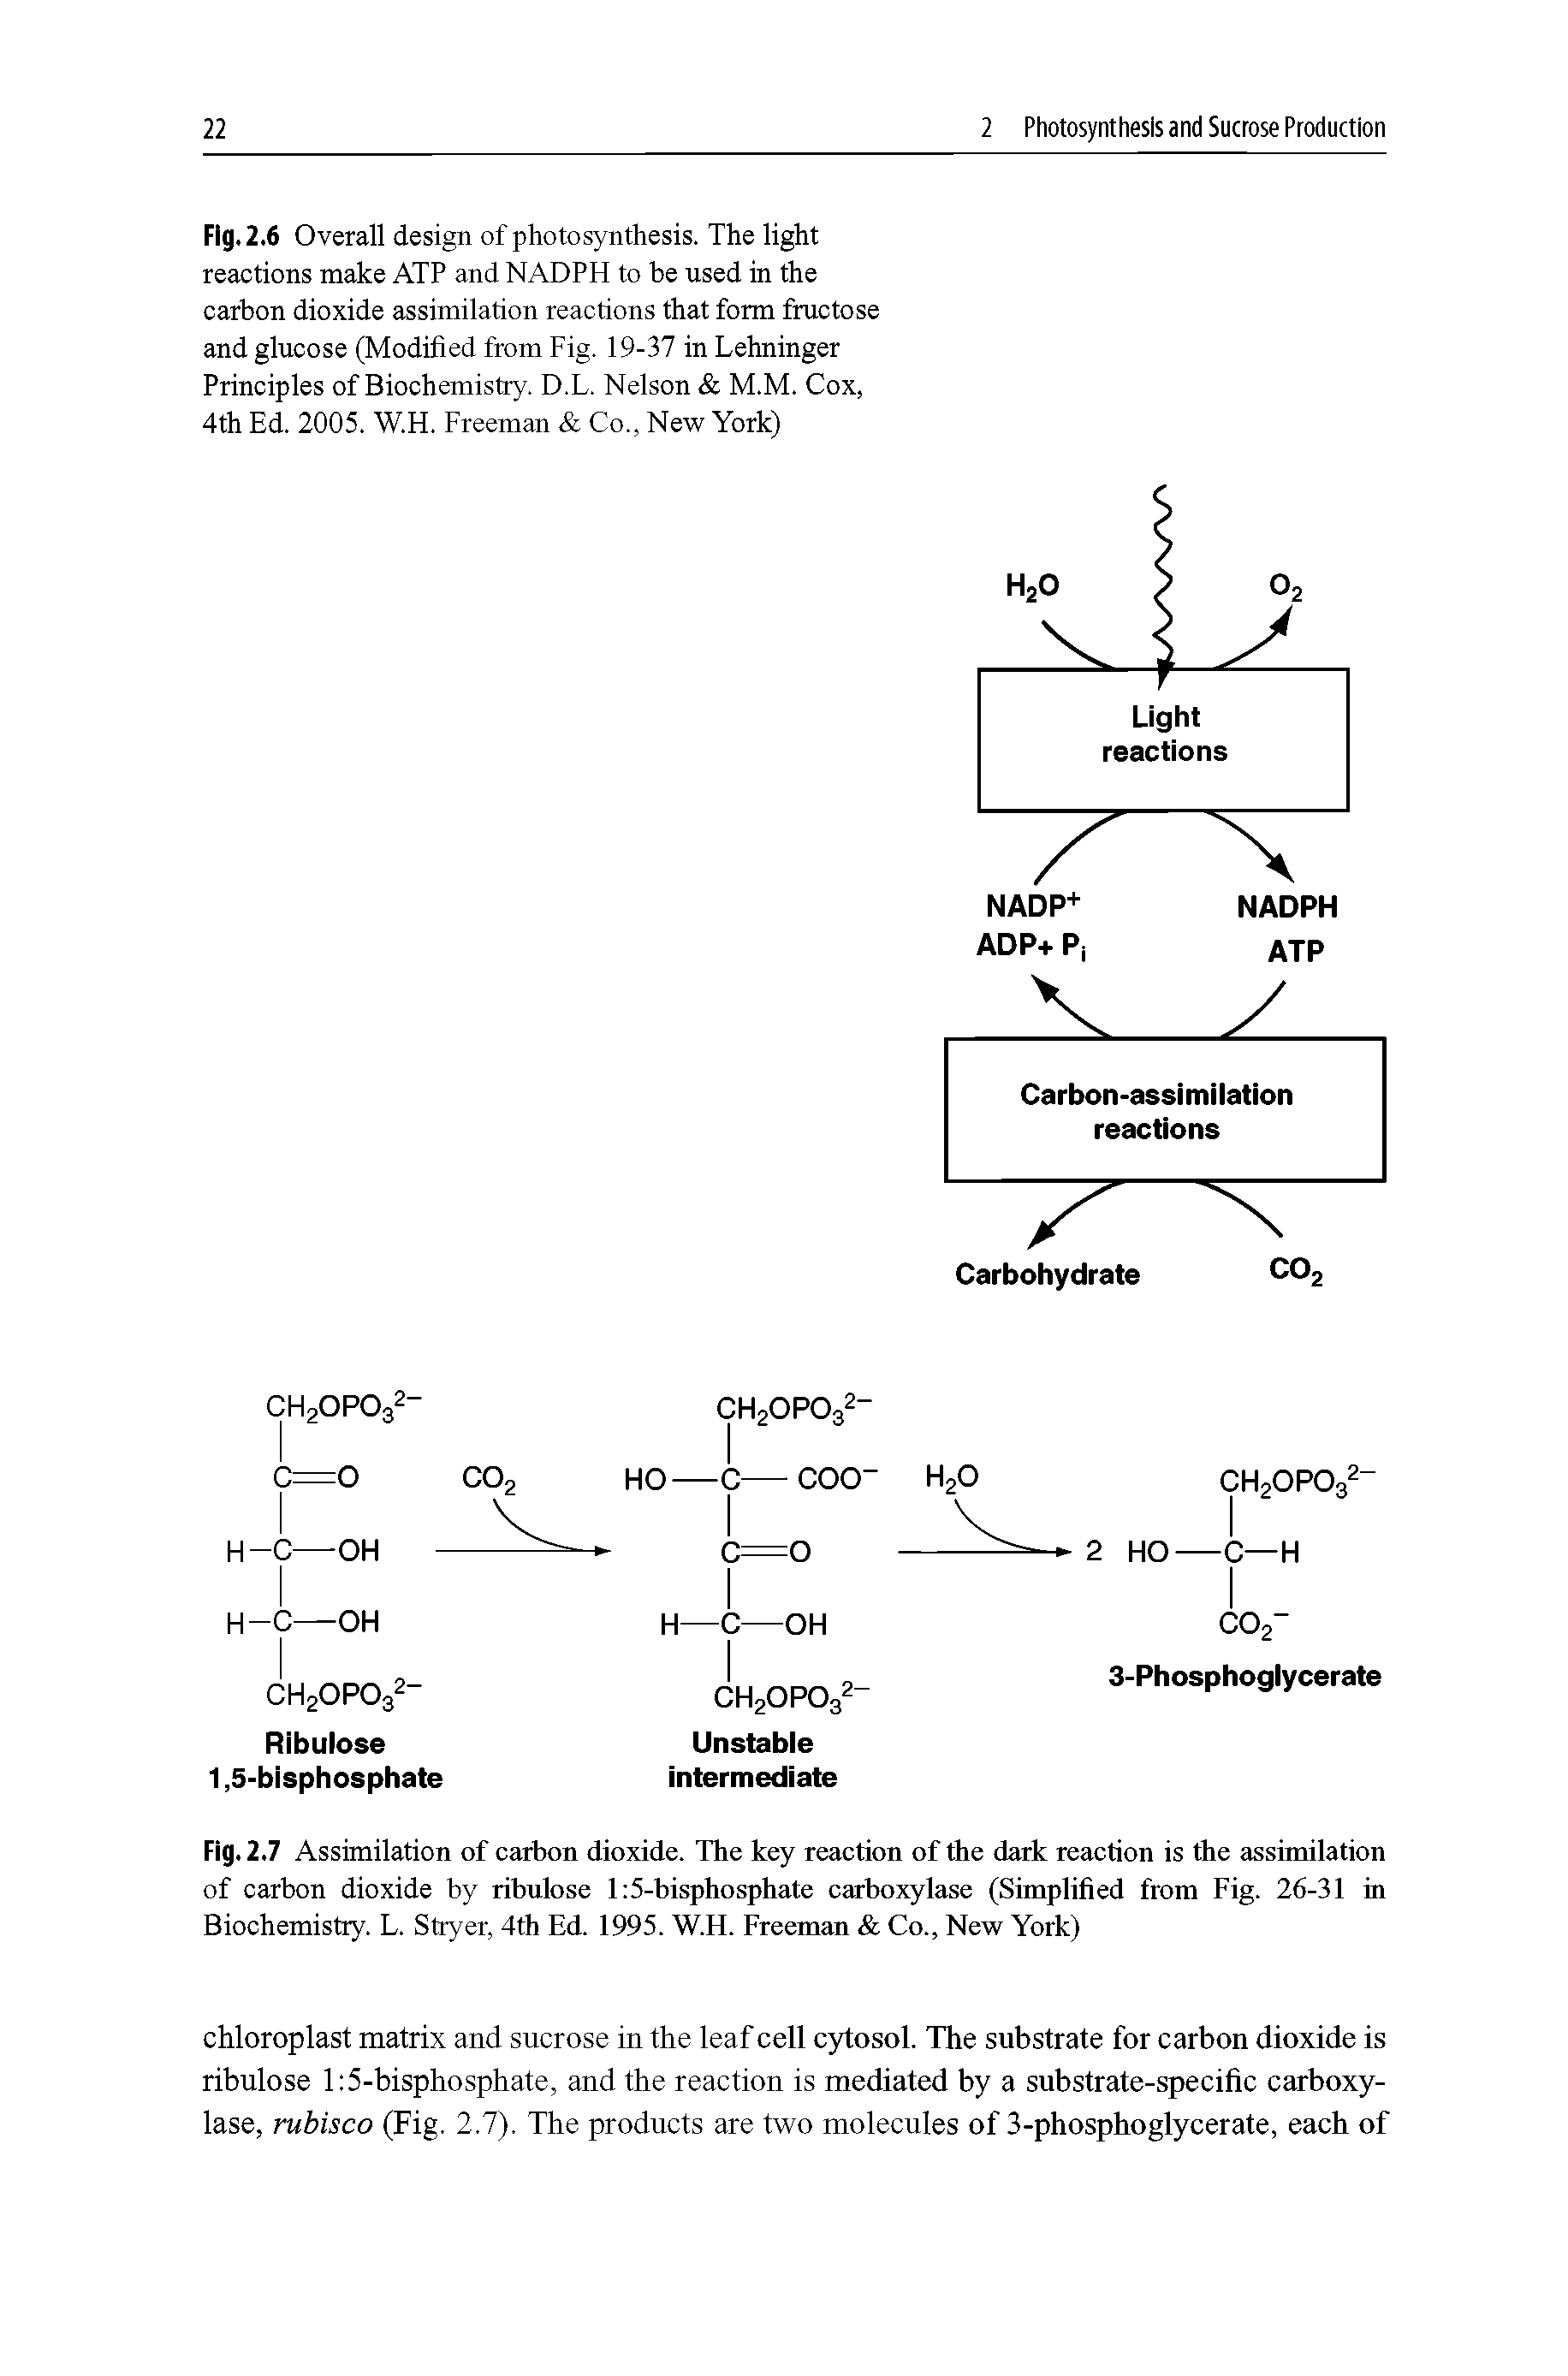 Fig.2.7 Assimilation of carbon dioxide. The key reaction of the dark reaction is the assimilation of carbon dioxide by ribulose l 5-bisphosphate carboxylase (Simplified from Fig. 26-31 in Biochemistry. L. Stryer, 4th Ed. 1995. W.H. Freeman Co., New York)...